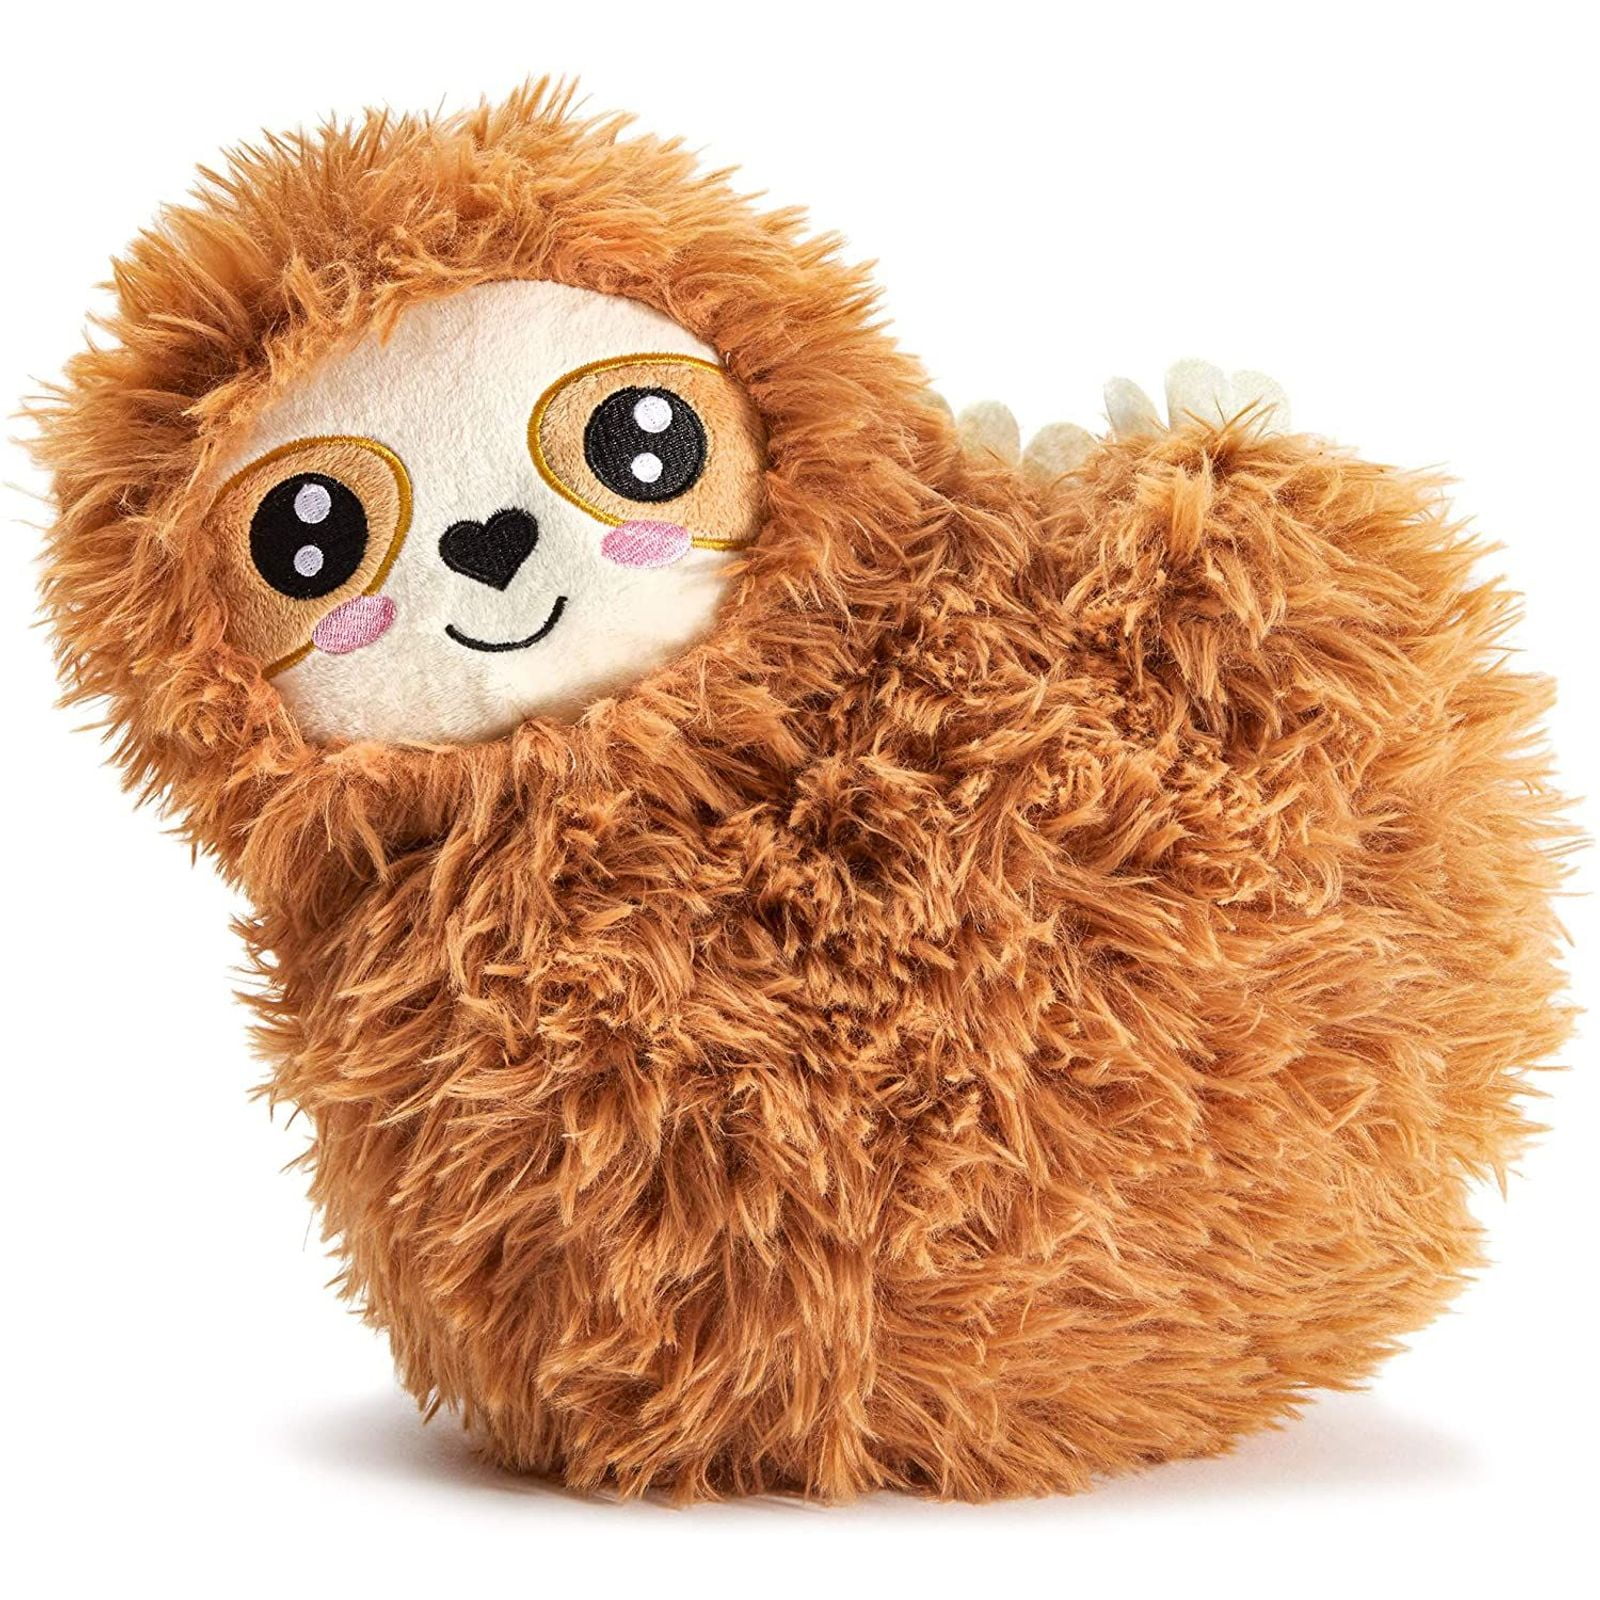 personalized gift baby toys kawaii plush birthday gift for child Sloth birthday cute plush sloth Stuffed animal Sloth gifts toy